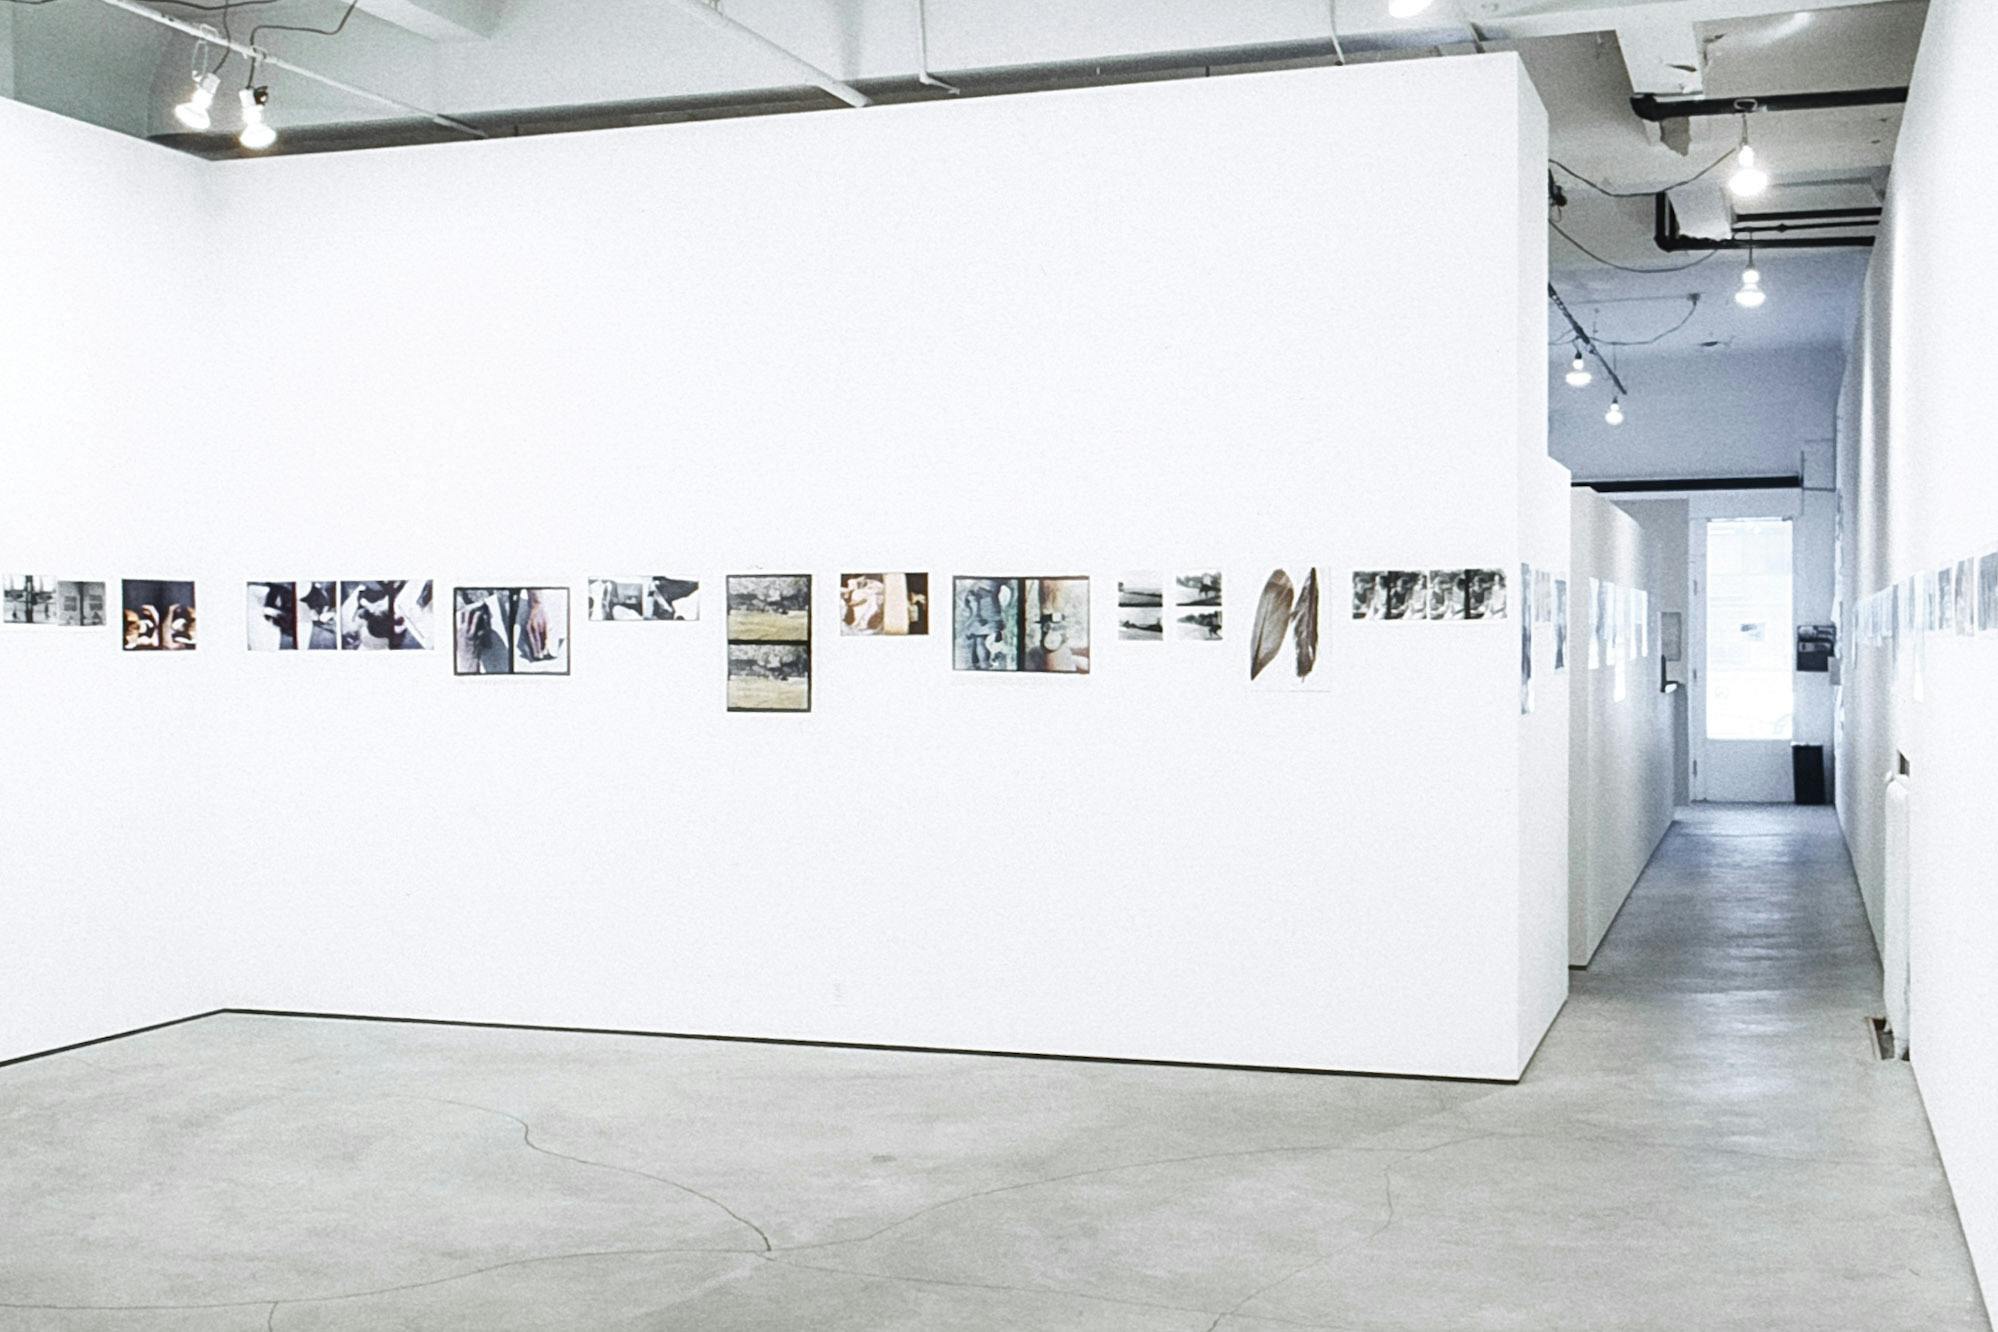 A gallery space with dozens of photos displayed in a line across the walls. The photos vary in size and orientation - some are vertical, some are horizontal, with variation in colour and tone as well.